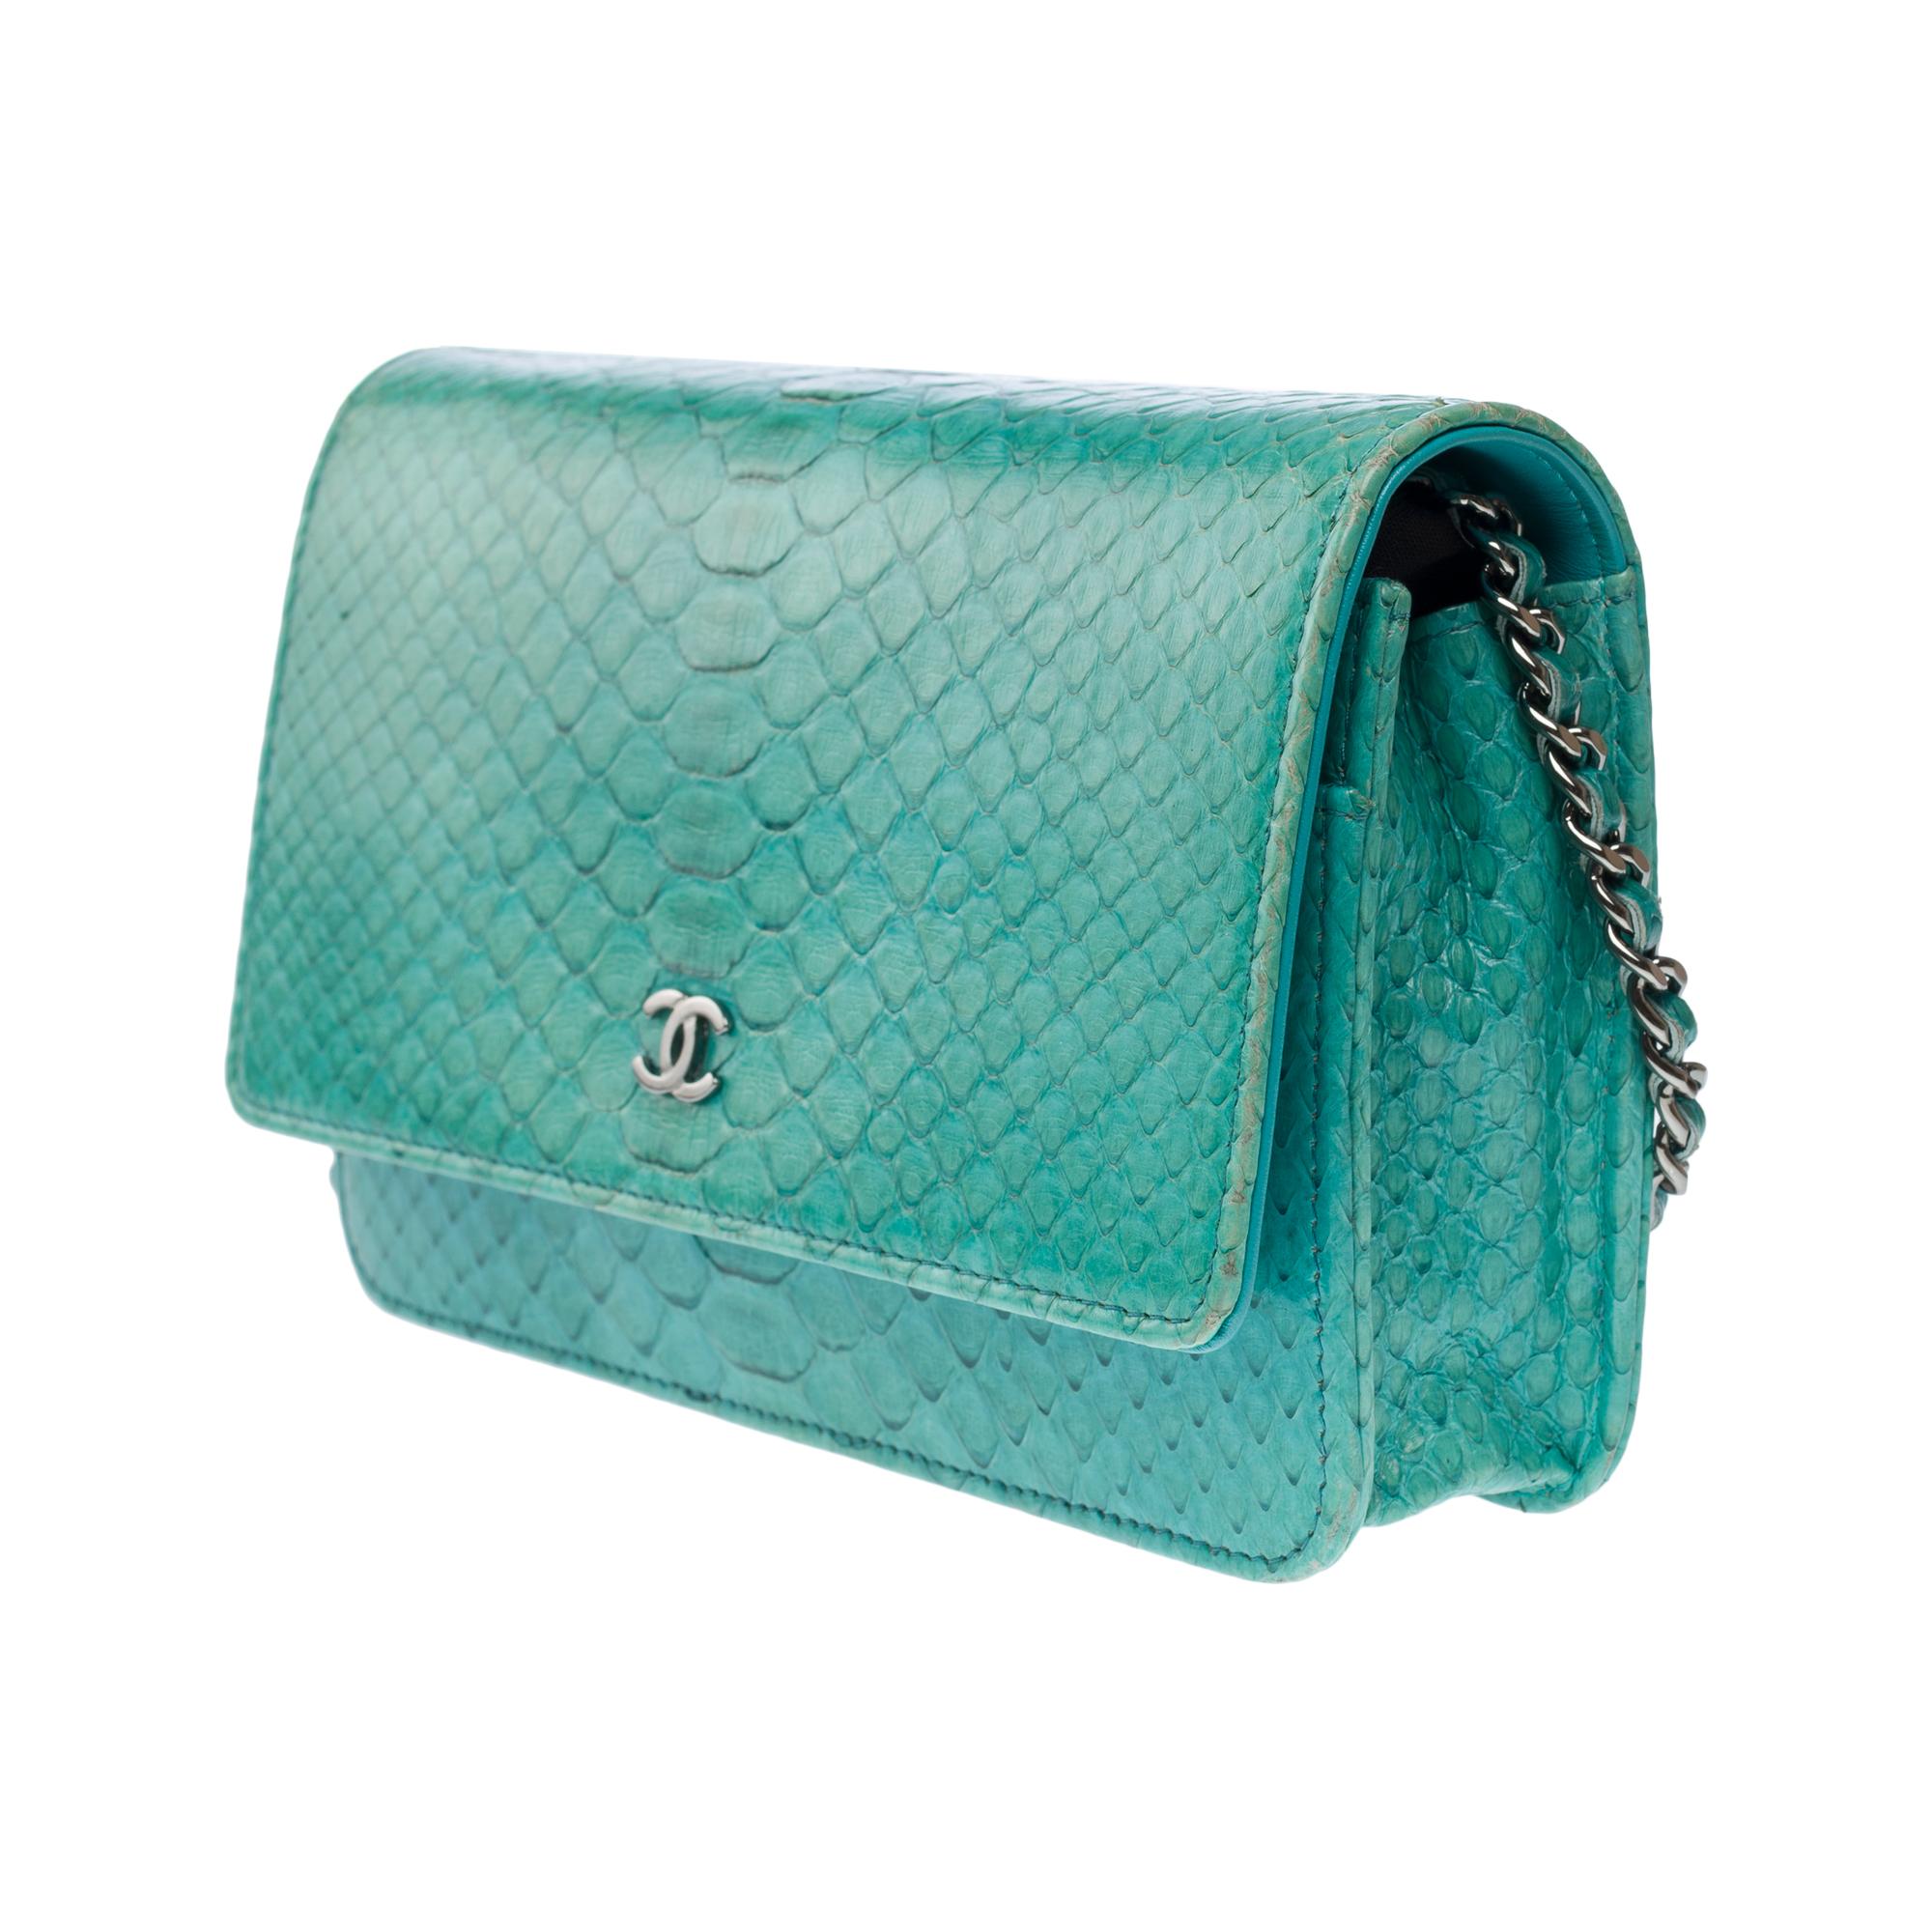 Chanel Wallet on Chain (WOC)  shoulder bag in Turquoise Blue Python leather, SHW 2